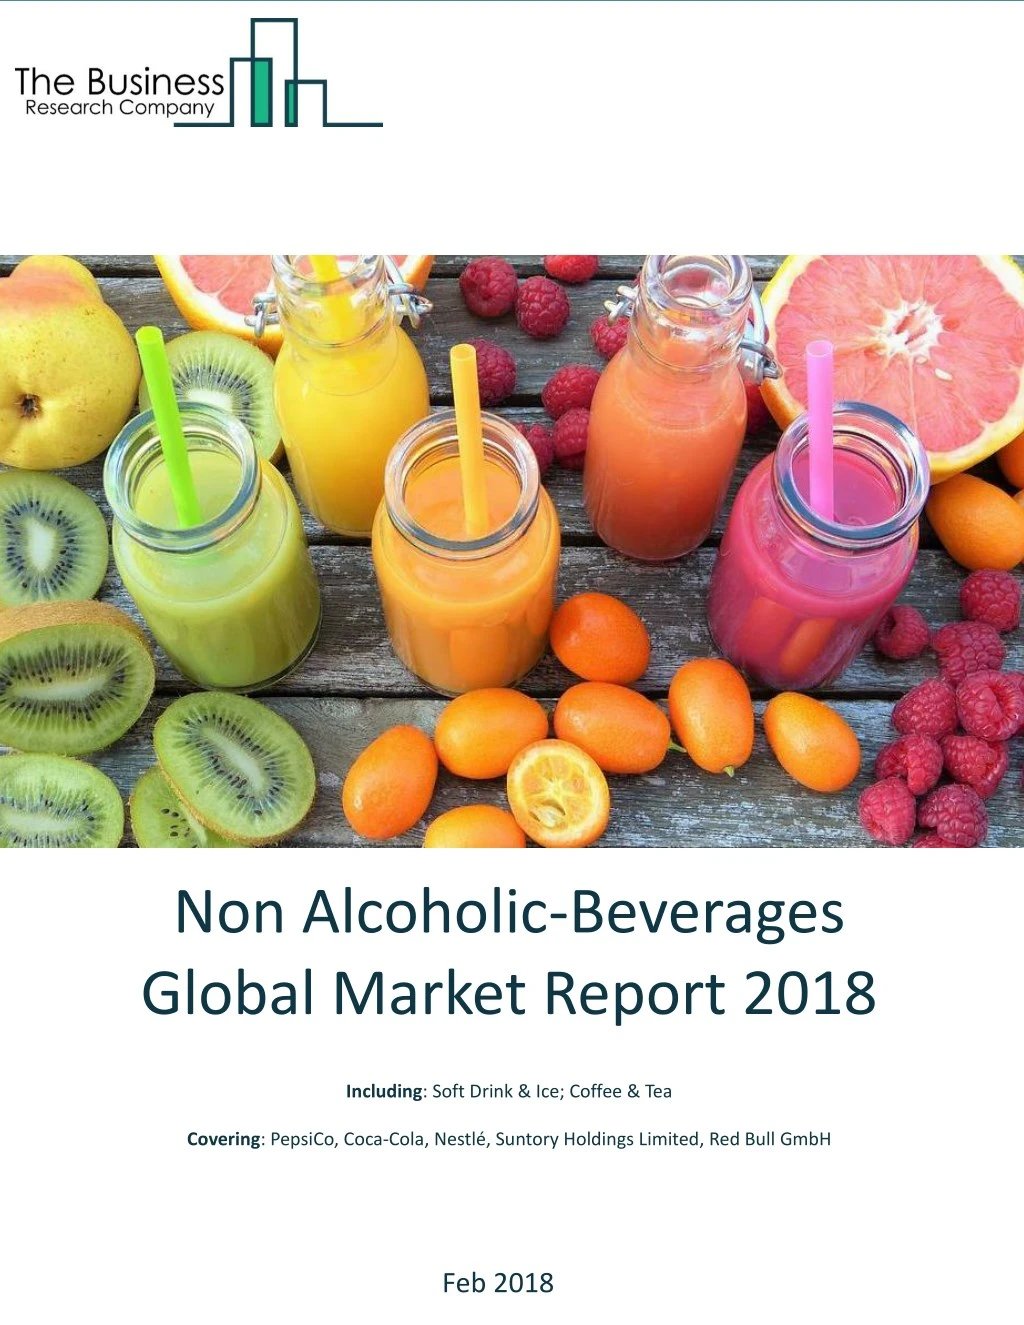 non alcoholic beverages global market report 2018